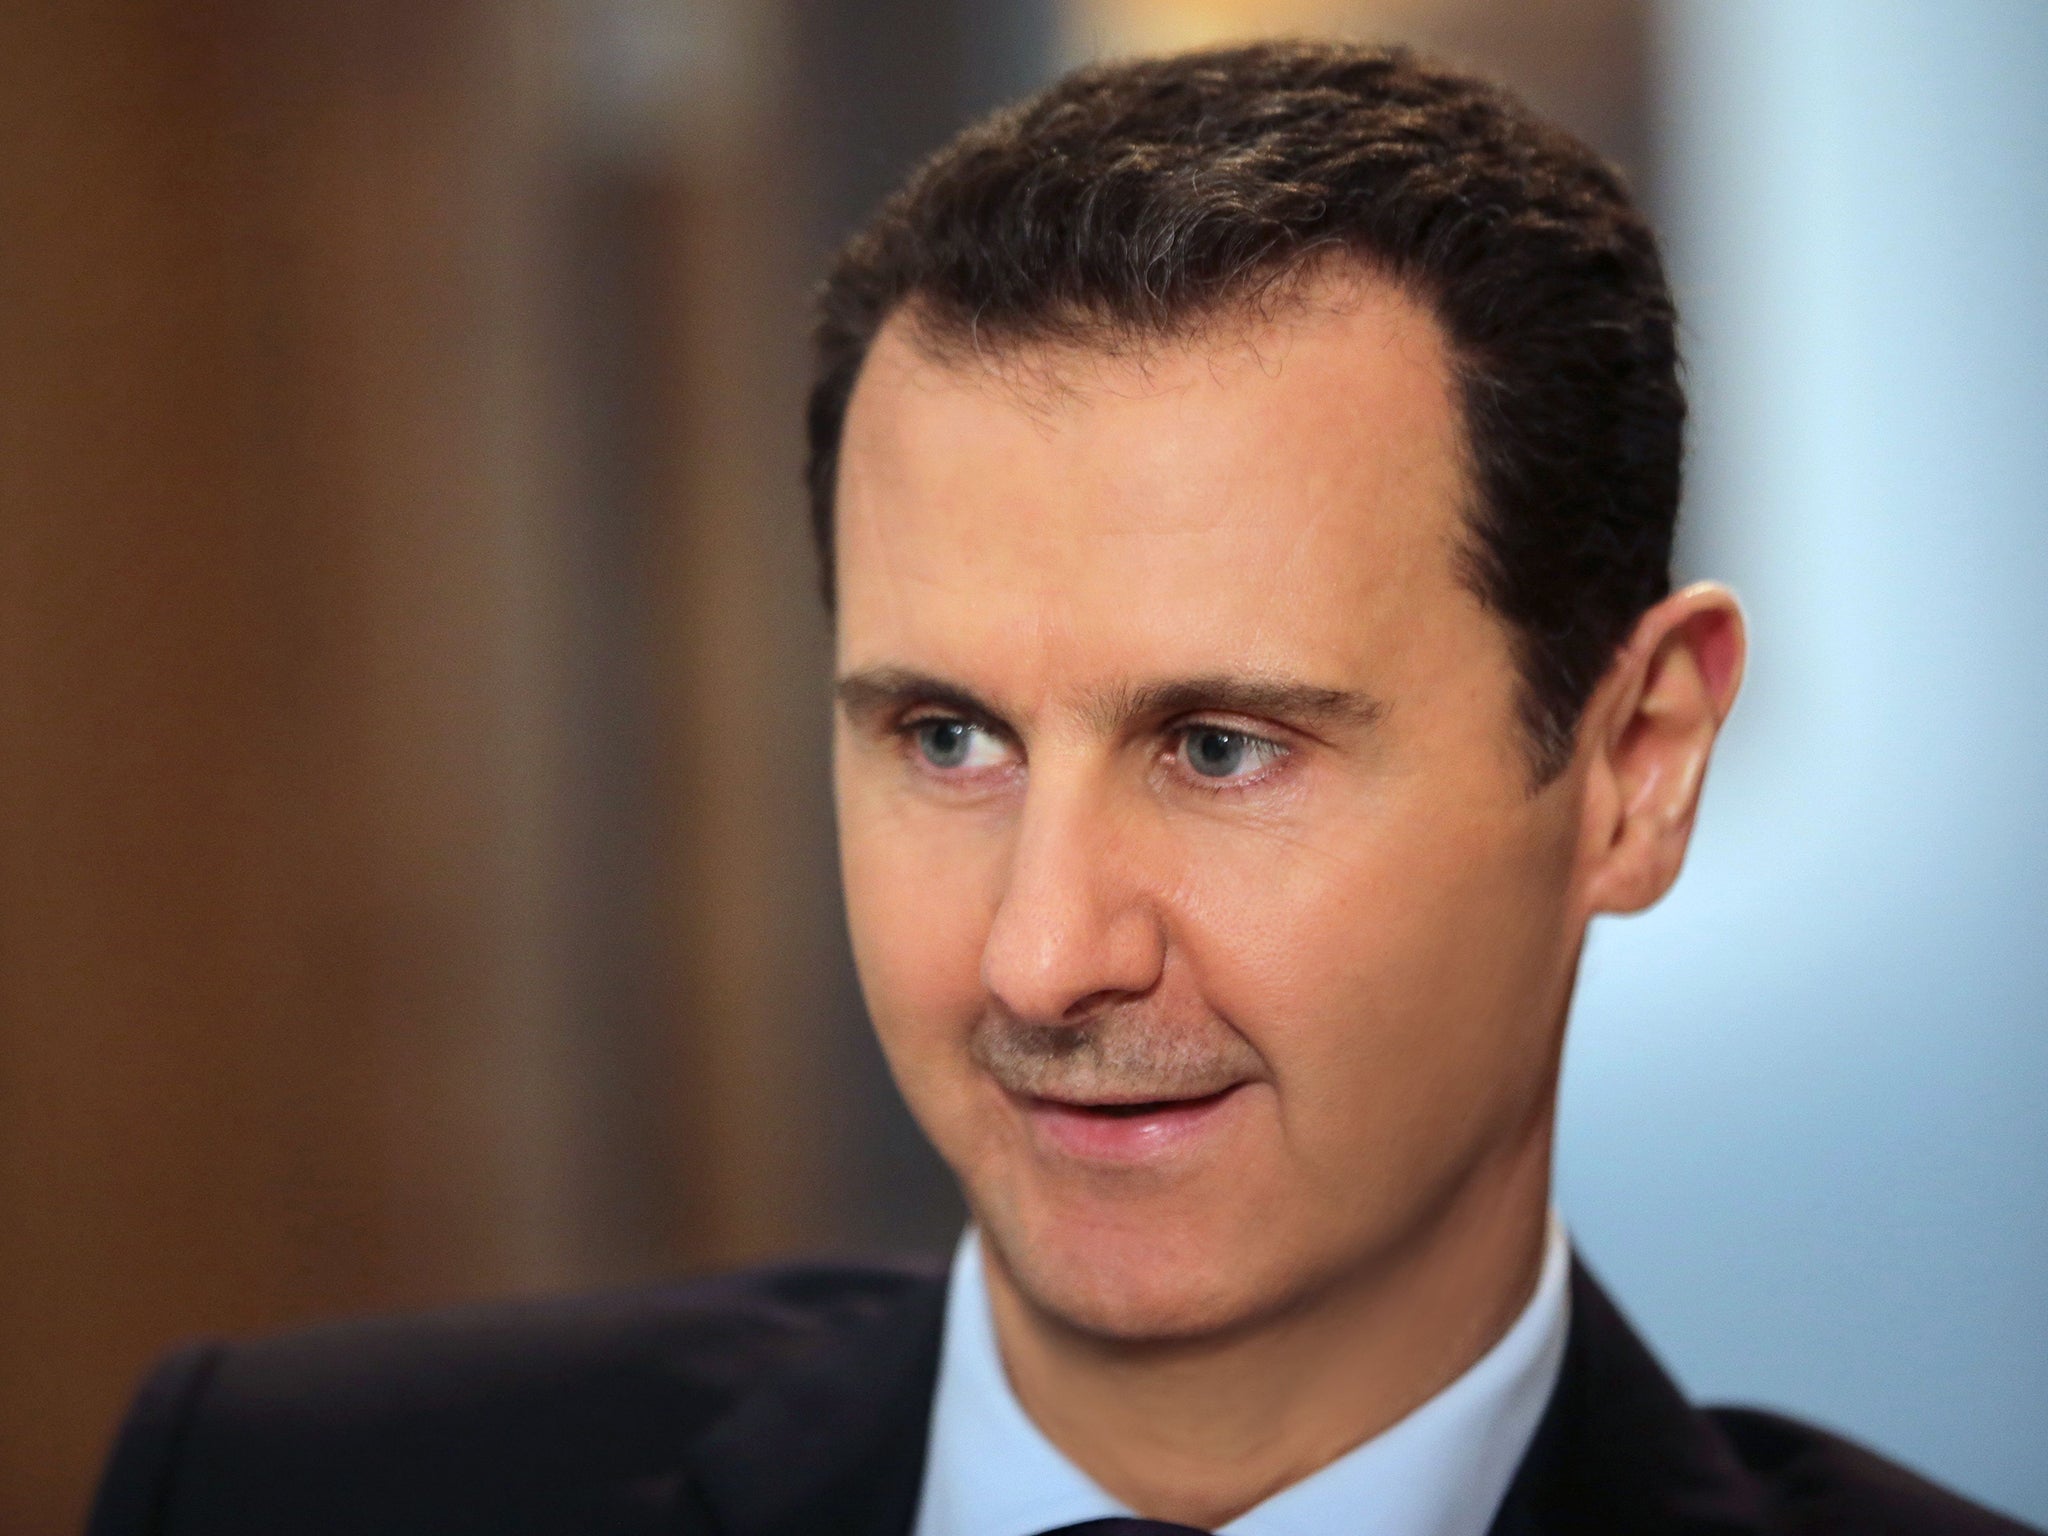 Britain should &apos;move in the direction of friendship&apos; with Bashar al-Assad, former UK ambassador to Syria says